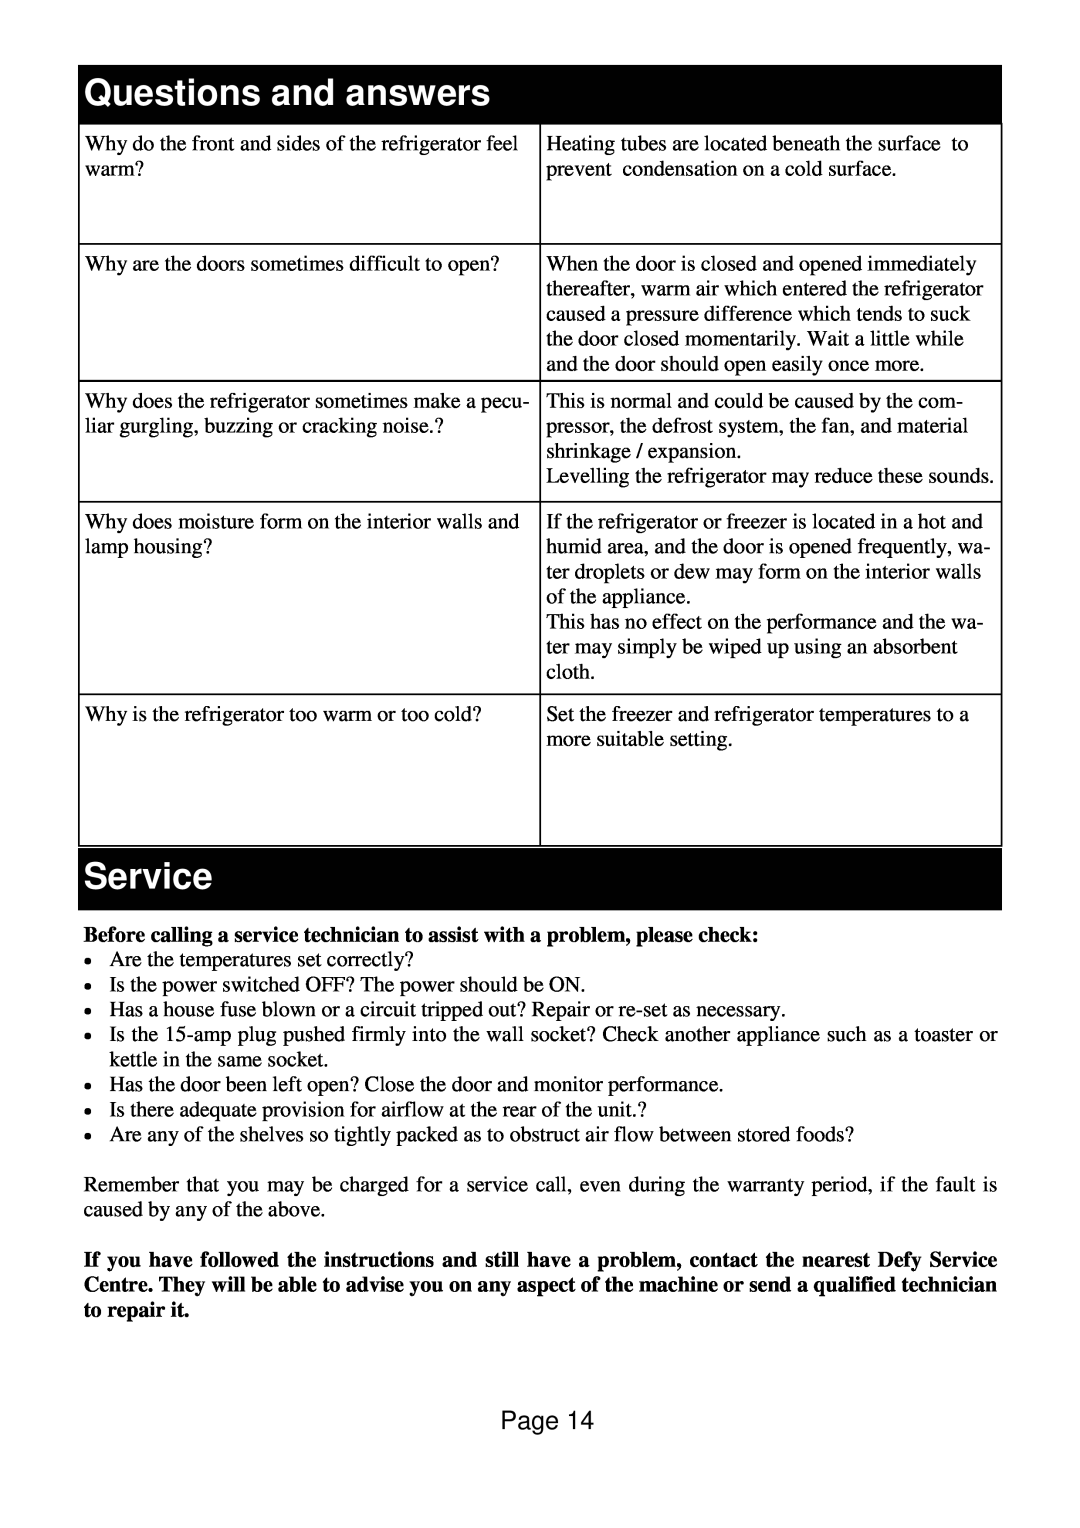 Defy Appliances F 600 LM owner manual Questions and answers, Service 